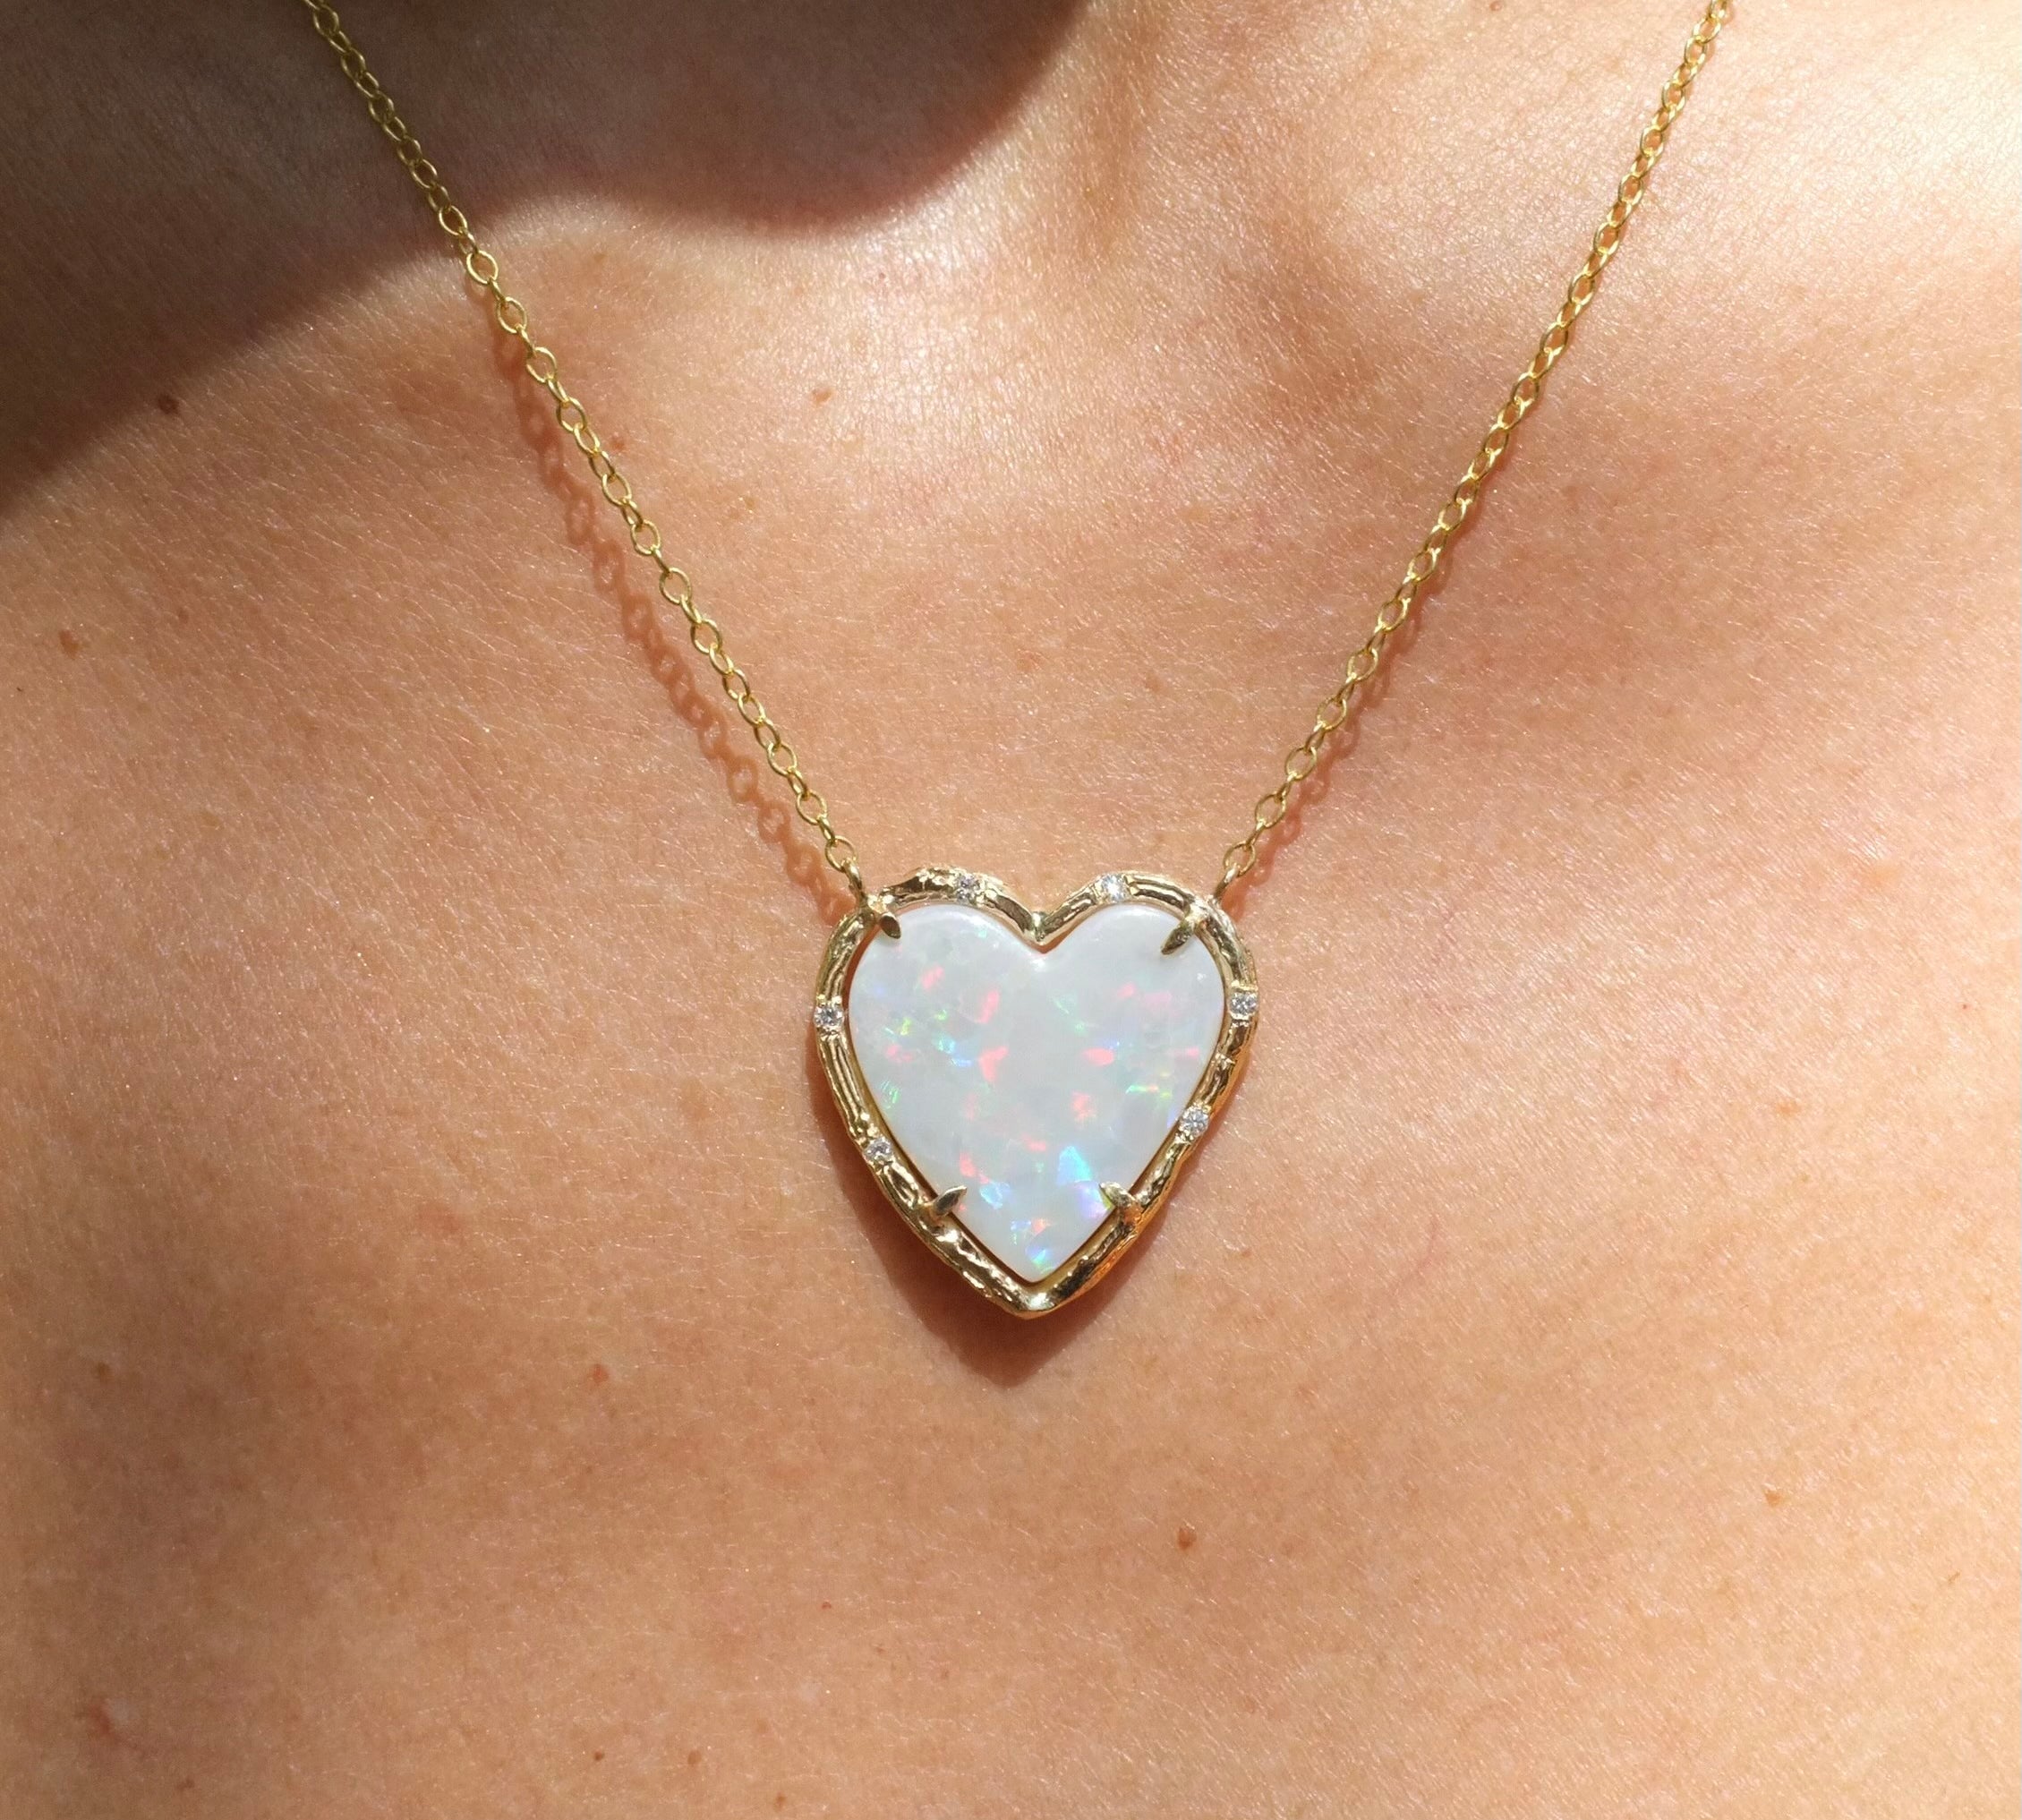 Opal Rainbow Heart Necklace Necklace Elisabeth Bell Jewelry   